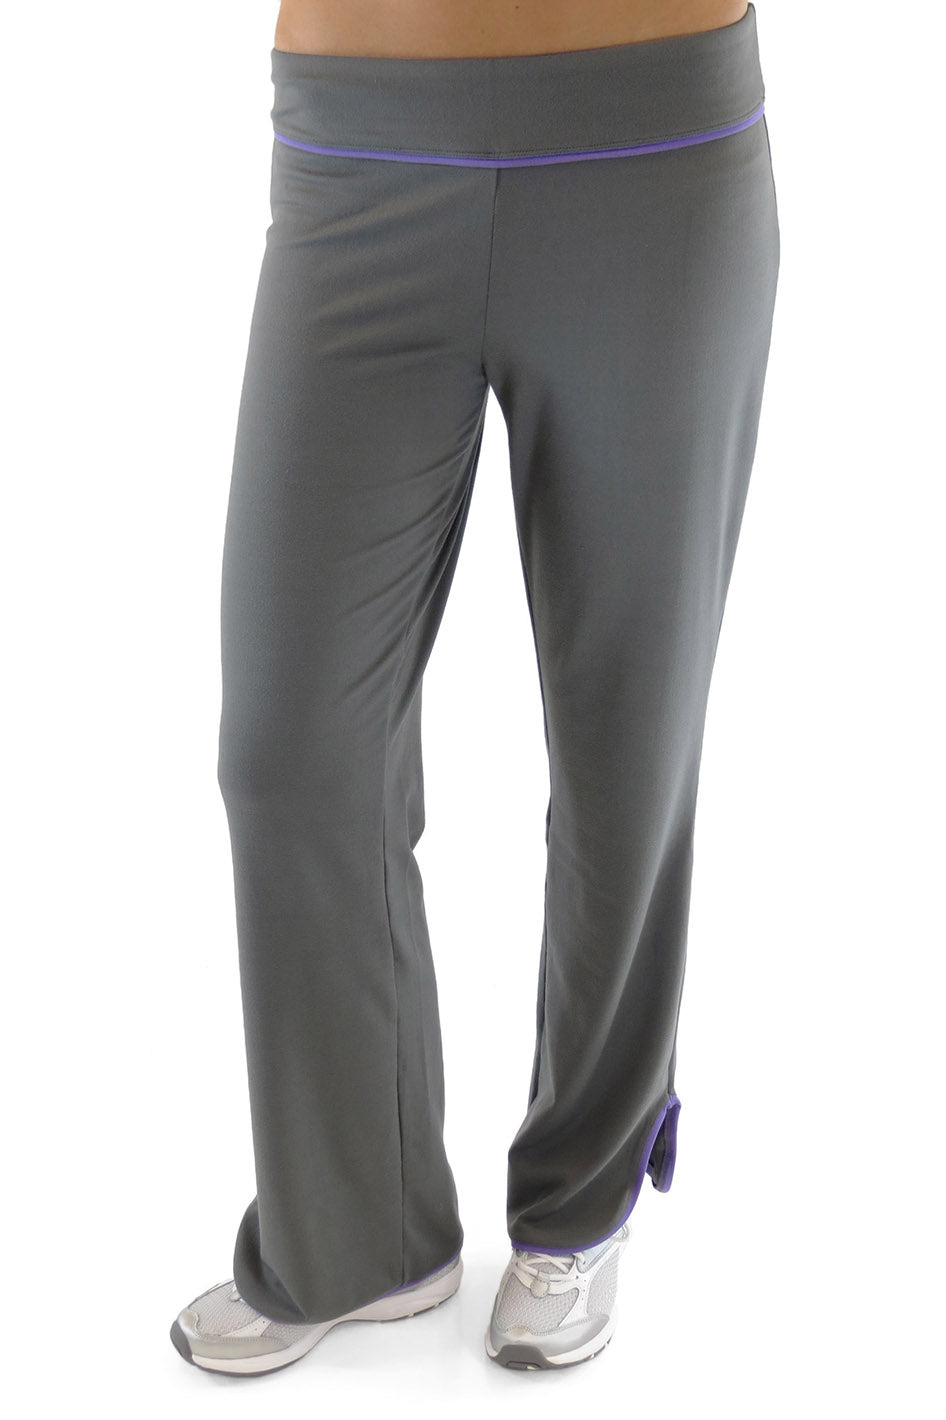 Reflect Relaxed Fit Yoga Pant, Women's Pants